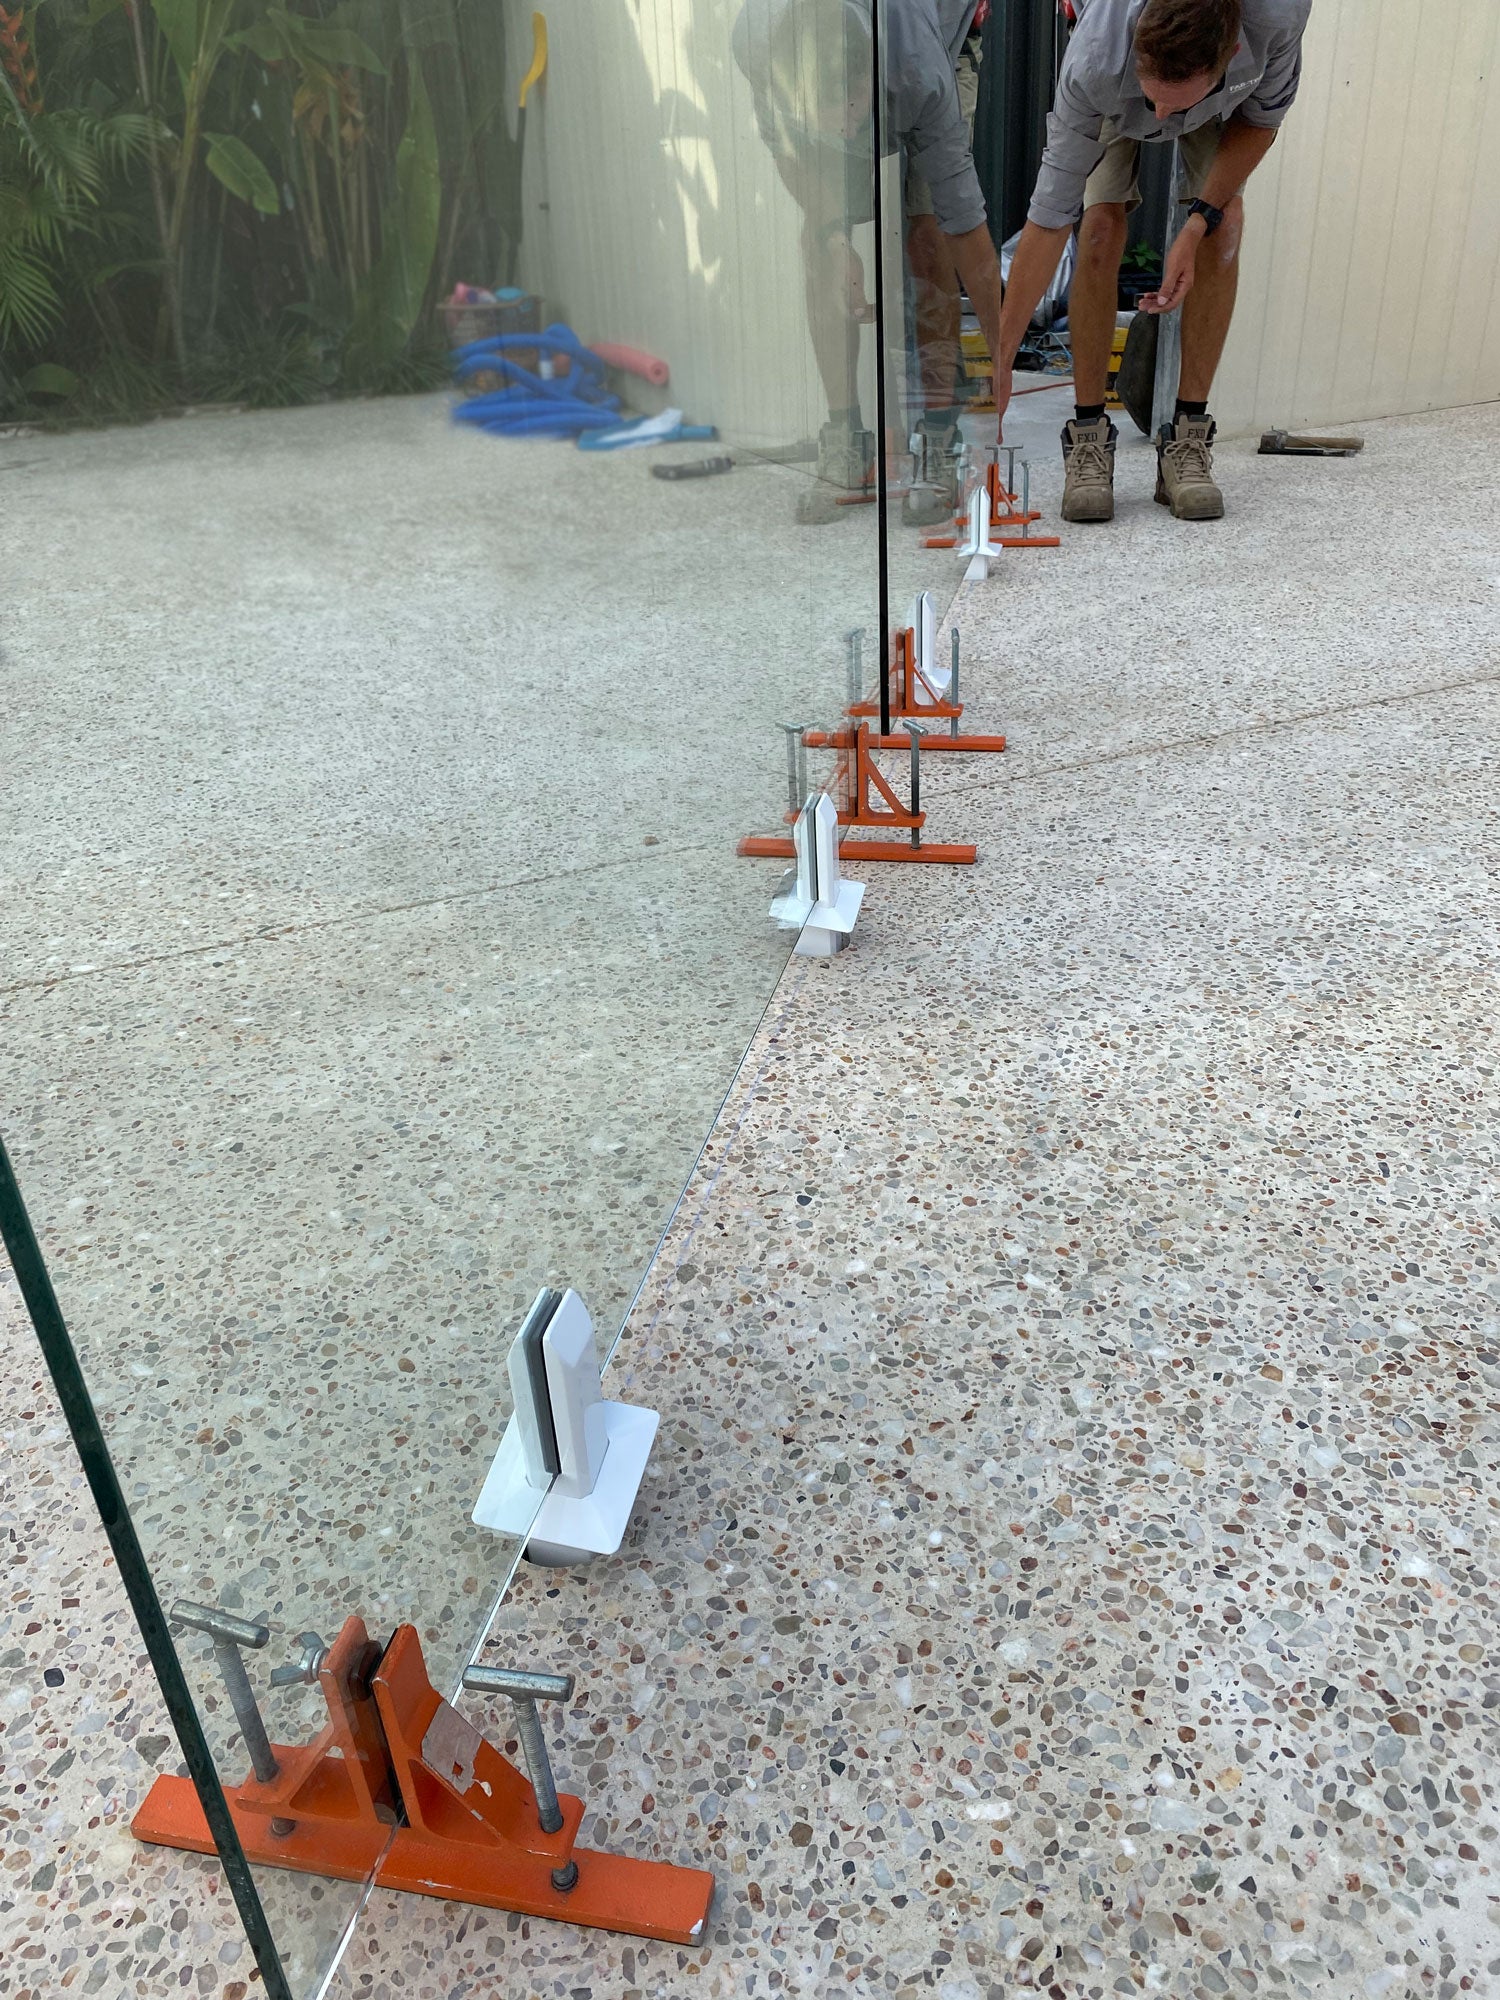 Turn knobs on GlassMate tool to easily adjust each panel of glass to ensure they are level, plumb and perfectly aligned with other panels before setting spigots into concrete